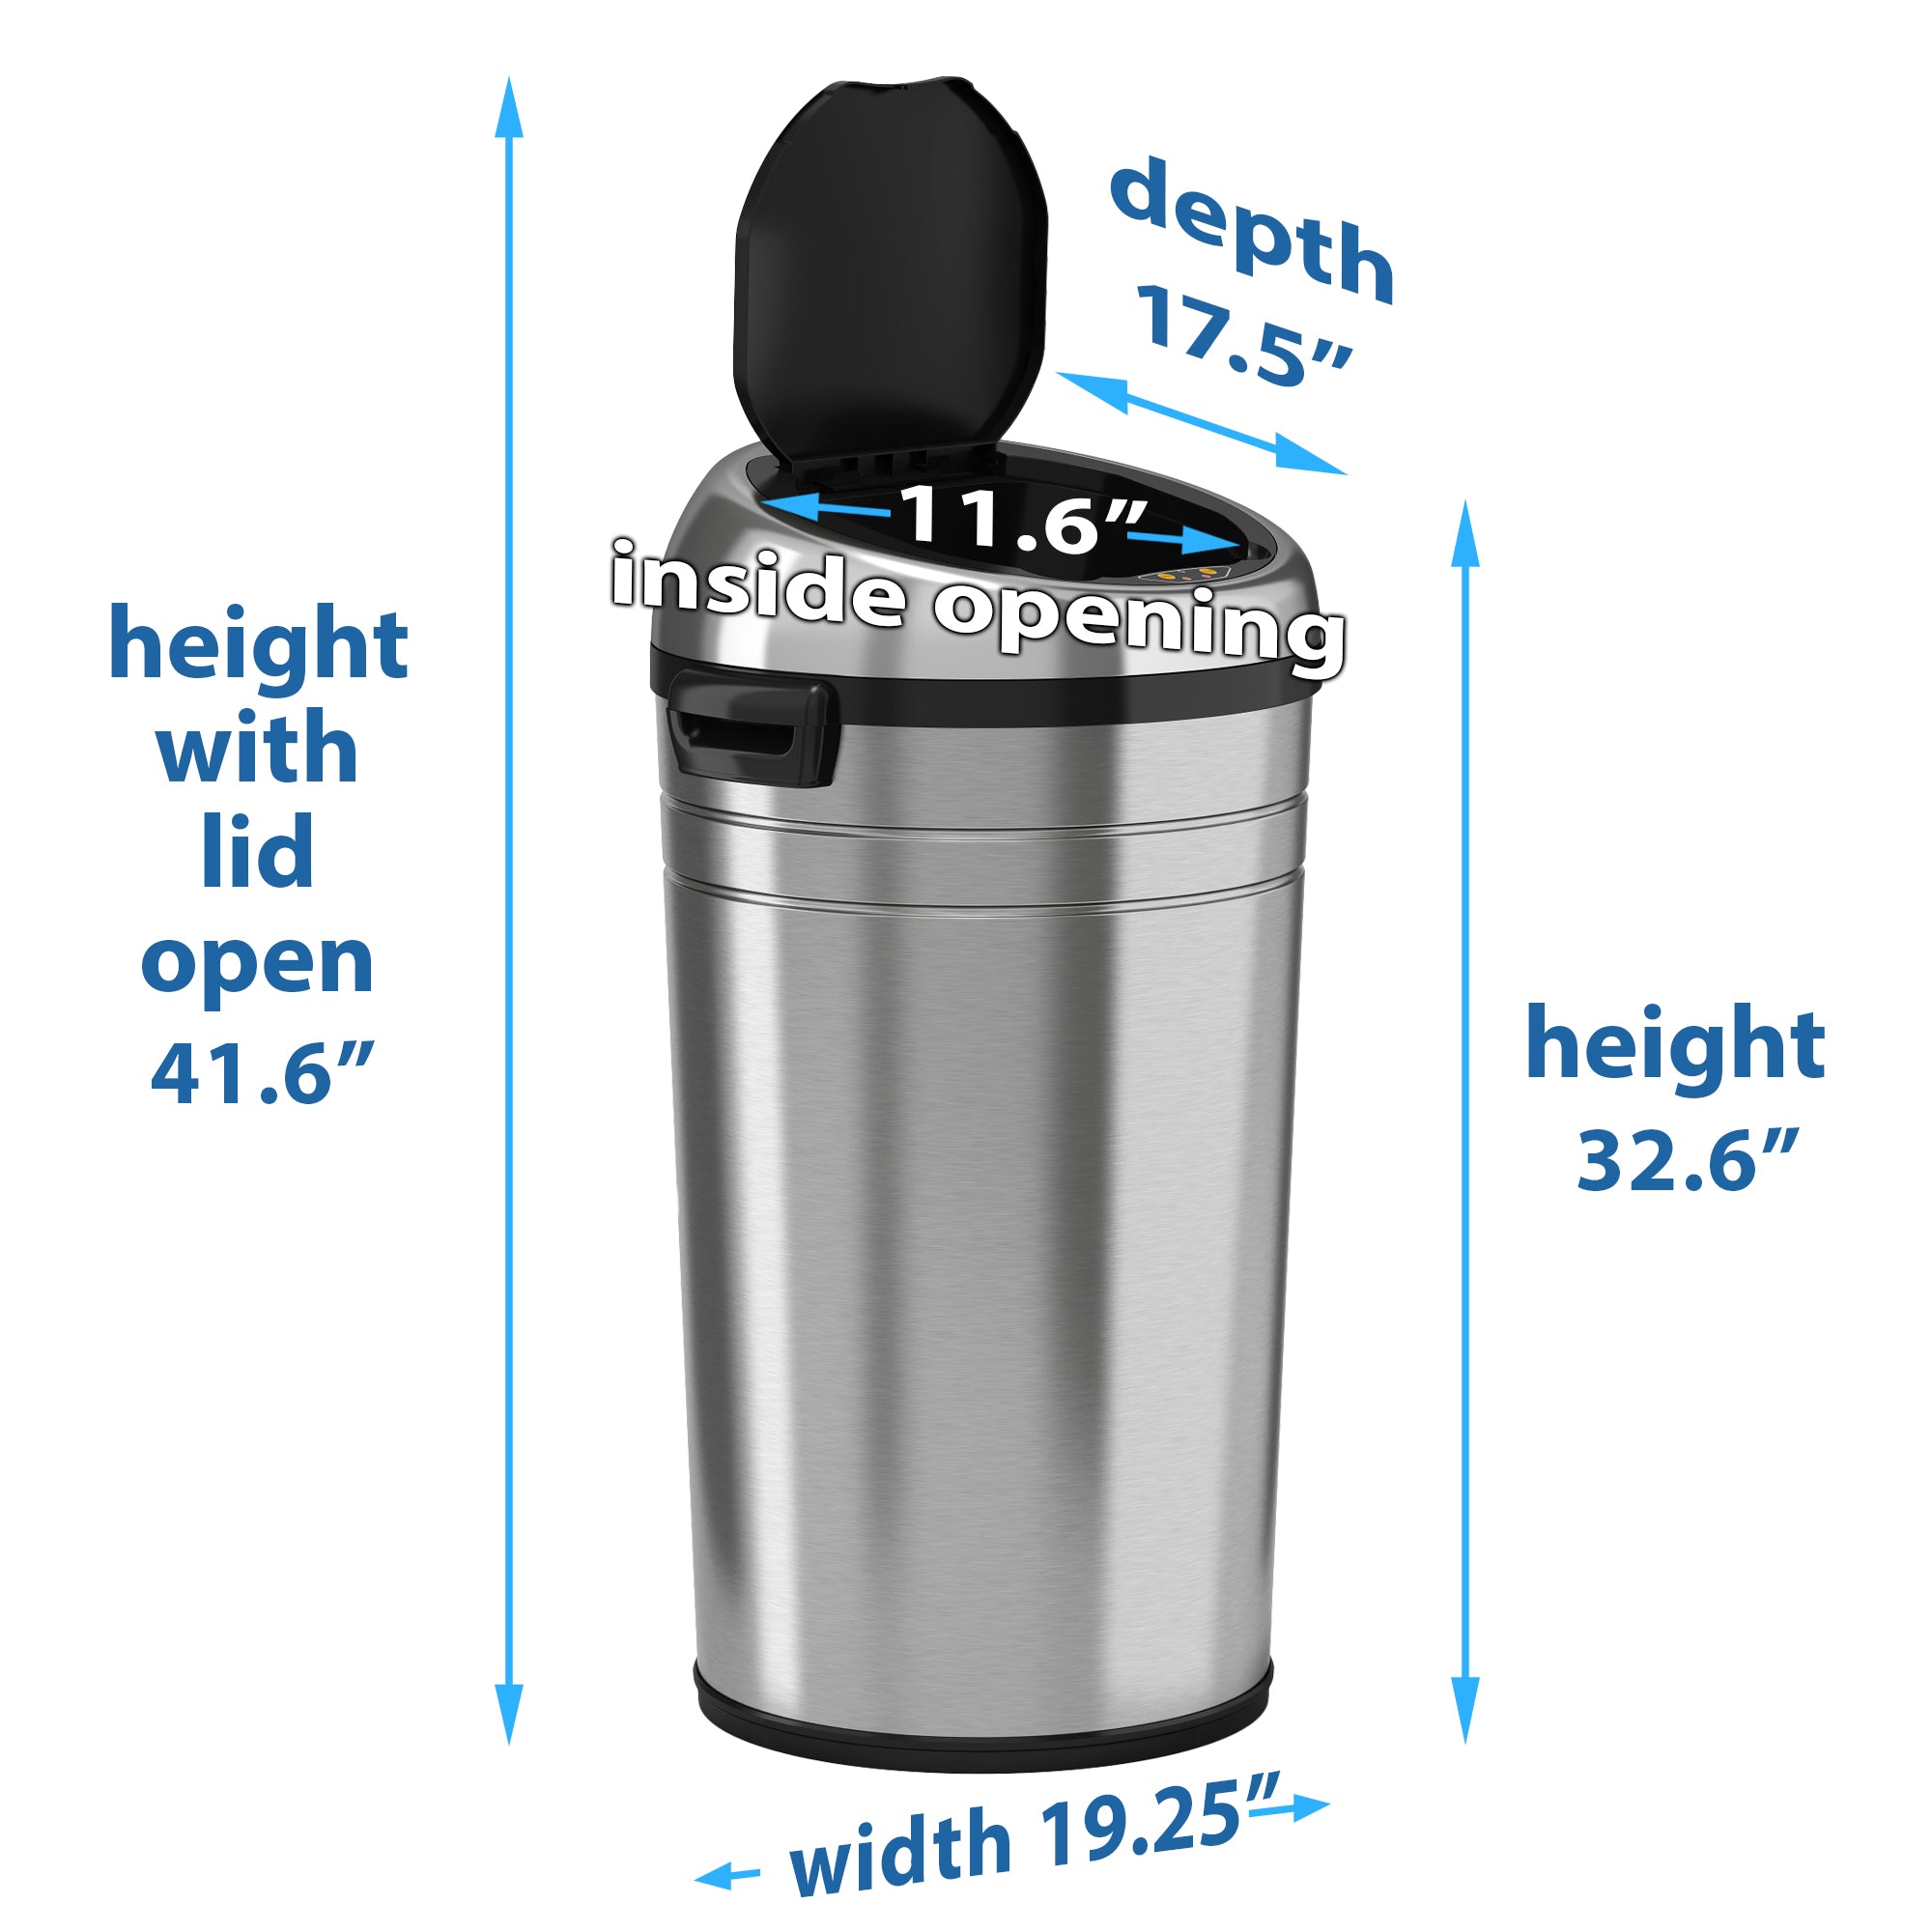 23 Gallon Large Sensor Trash Can with Wheels – iTouchless Housewares and  Products Inc.